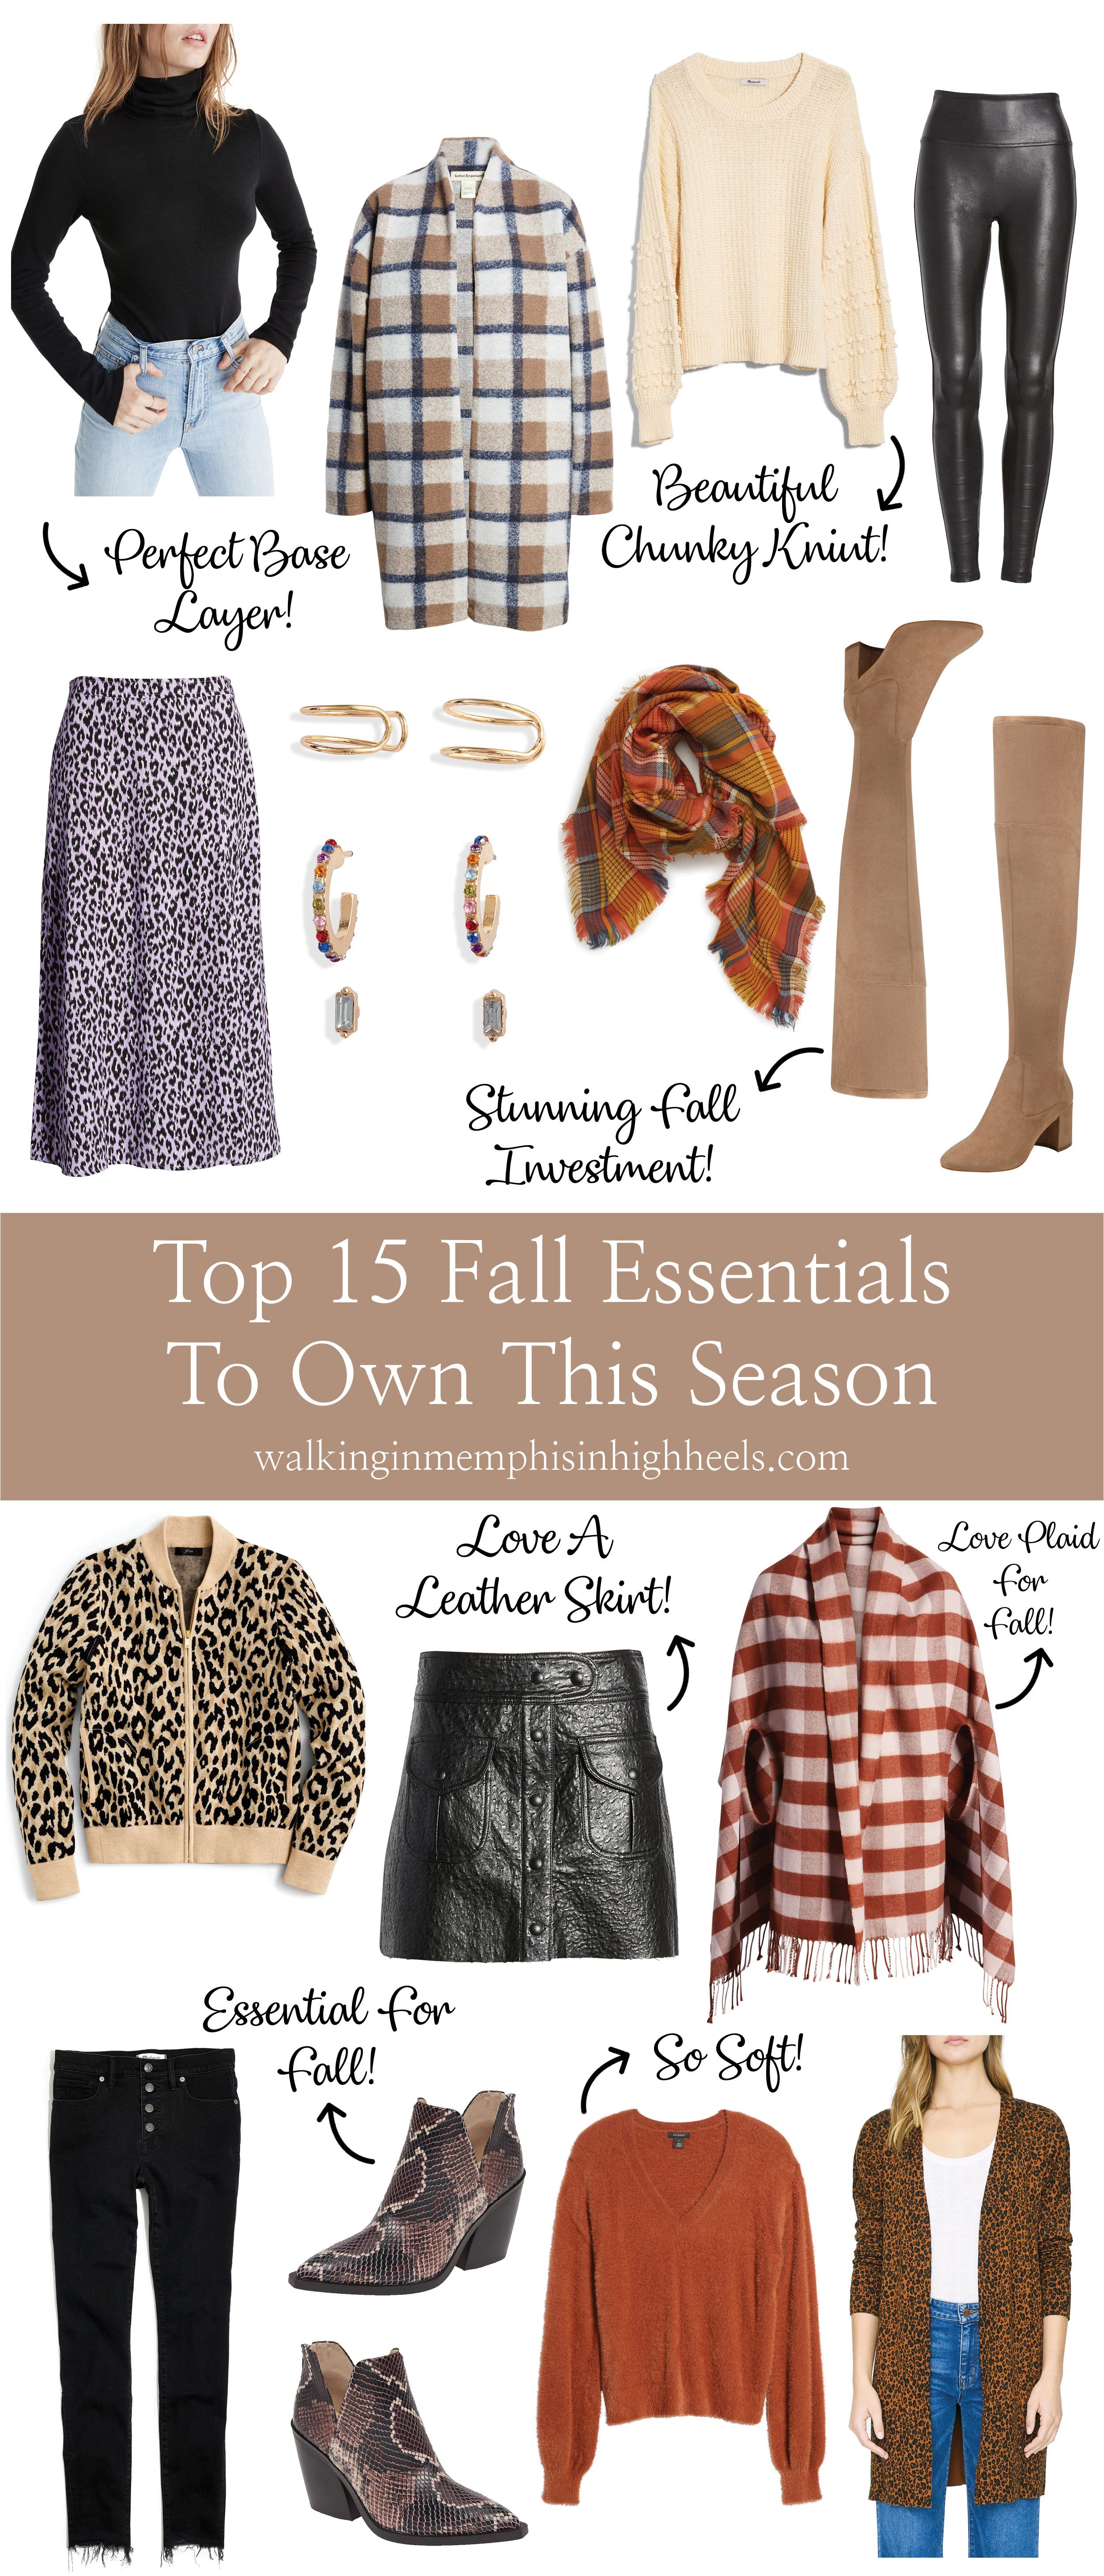 Fall essentials featured by top US fashion blog, Walking in Memphis in High Heels